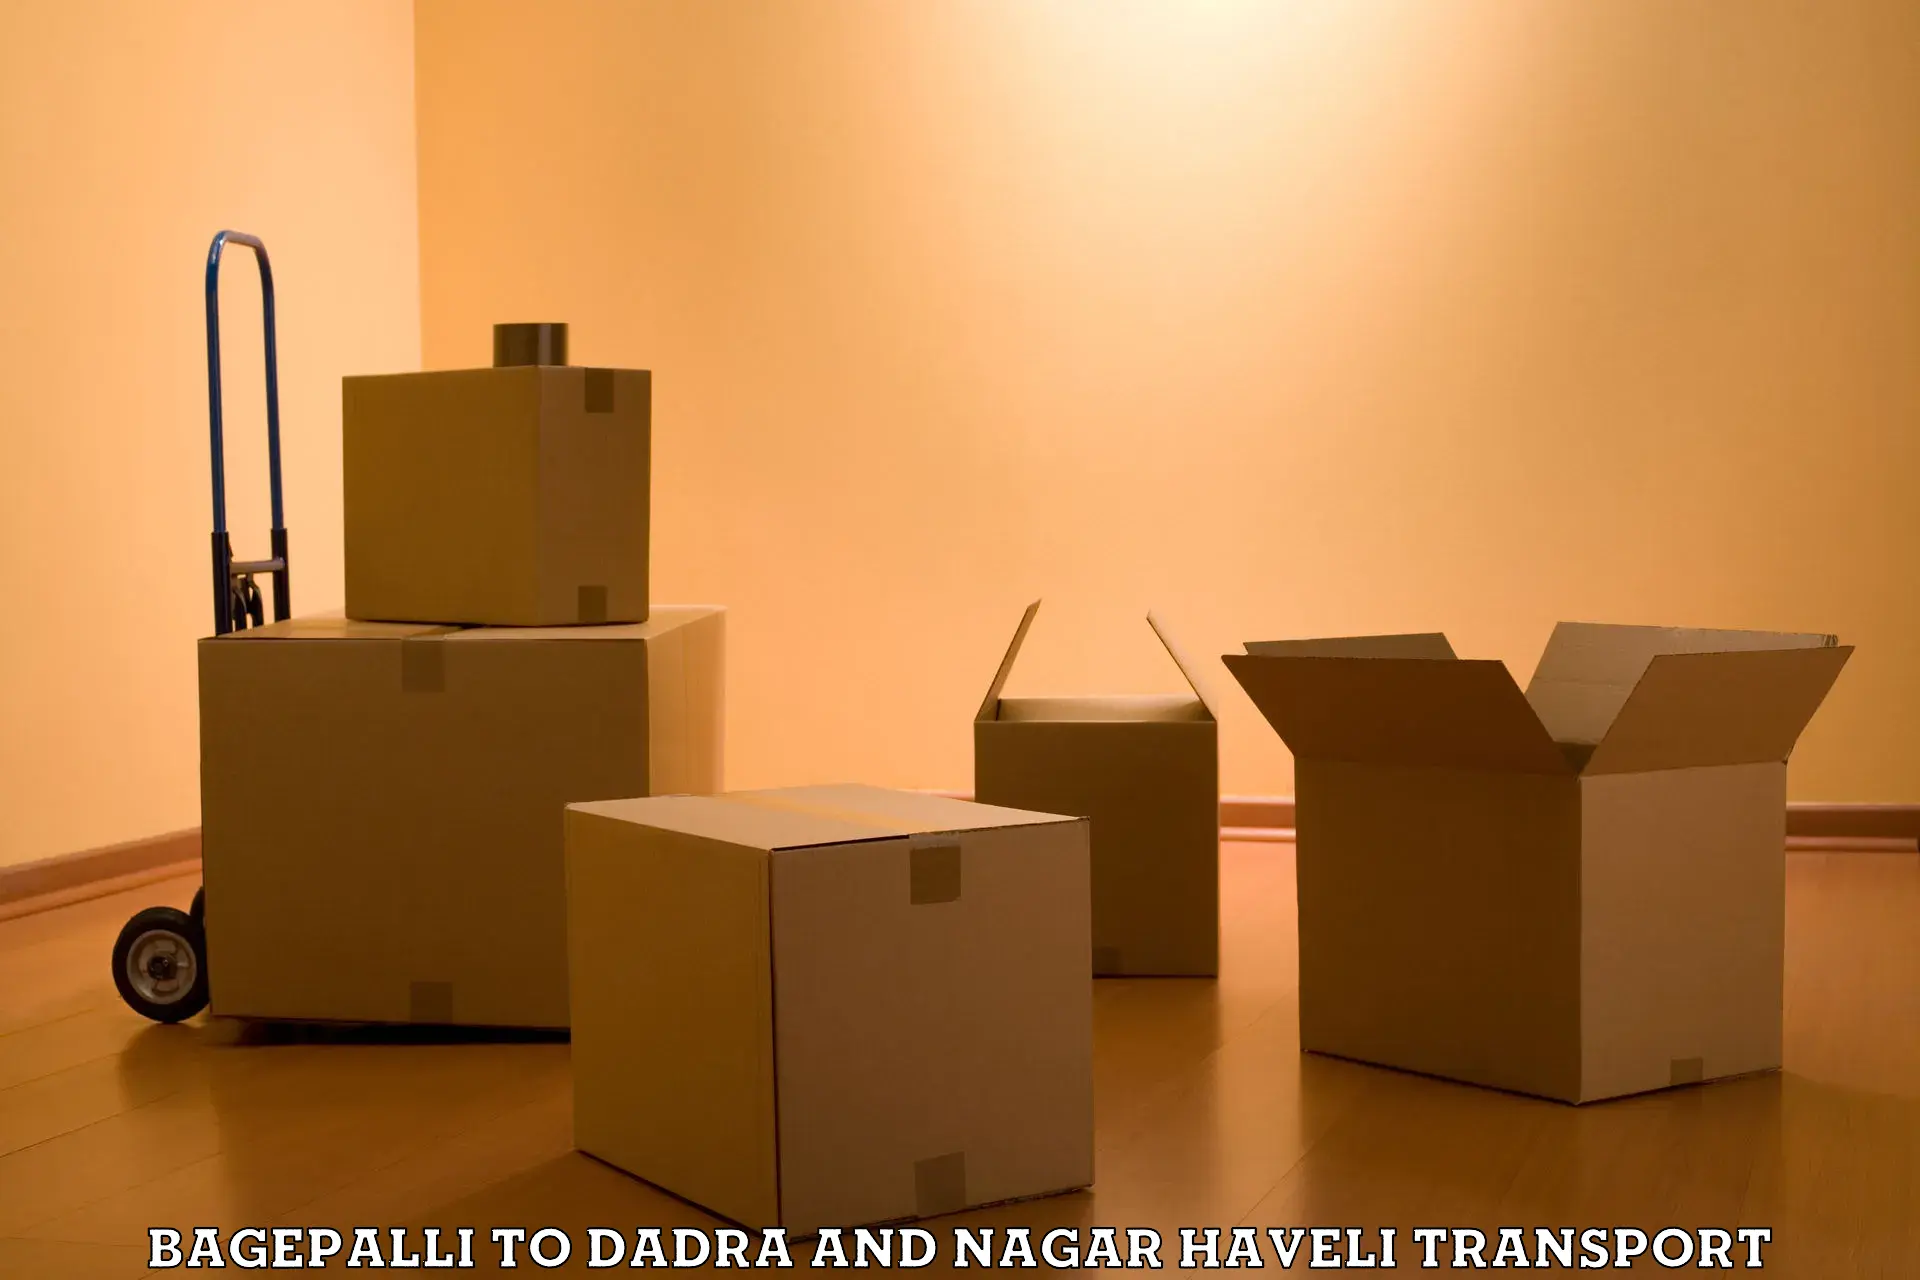 Daily parcel service transport Bagepalli to Dadra and Nagar Haveli